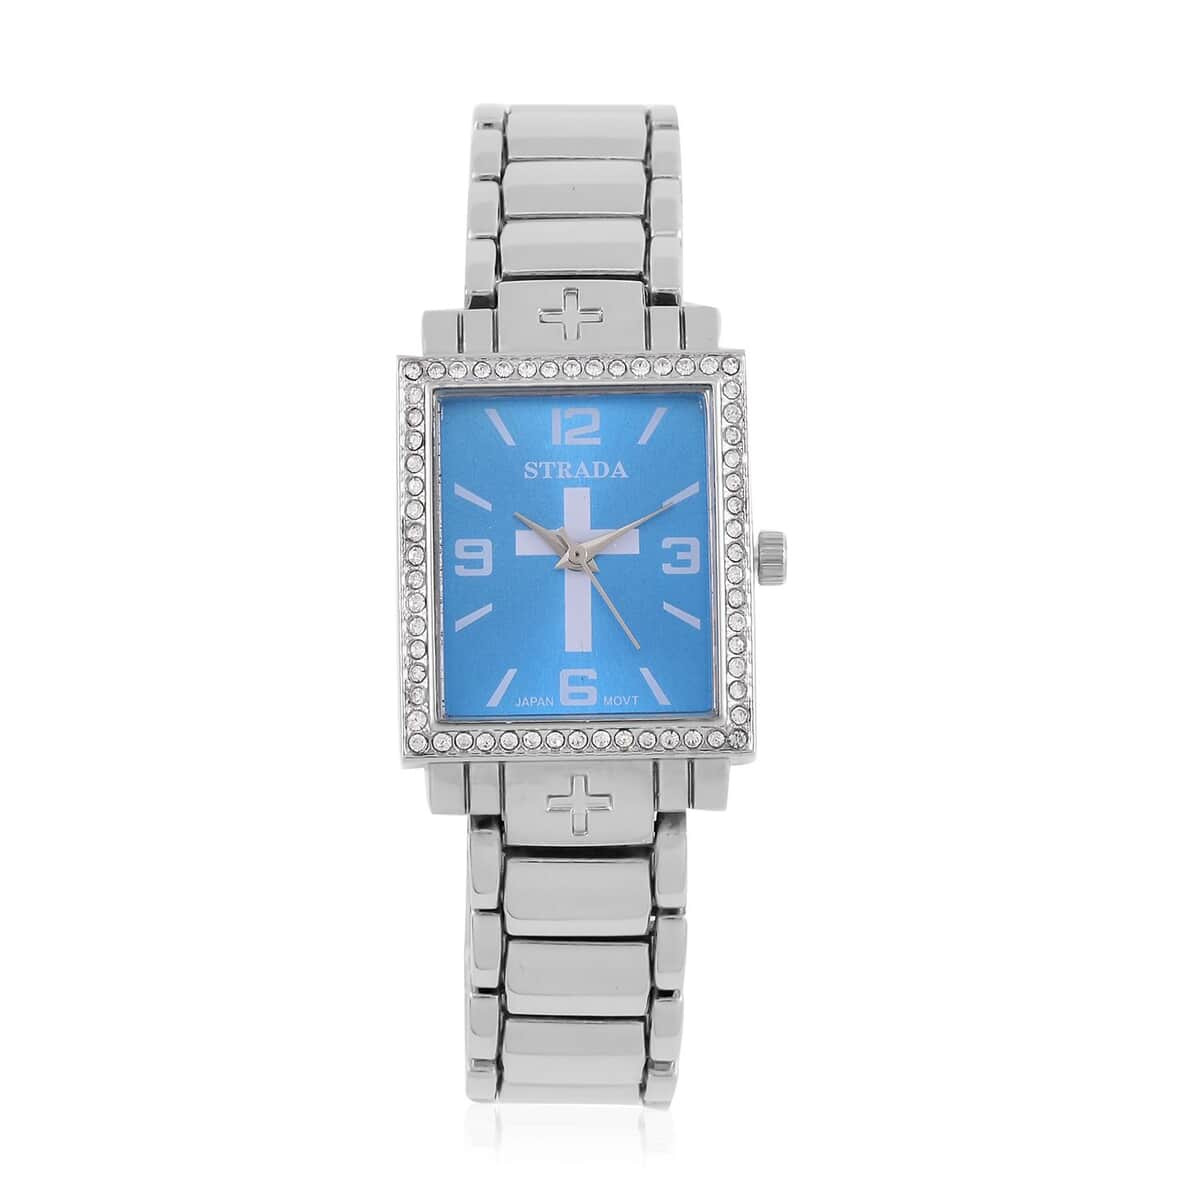 Strada White Austrian Crystal Japanese Movement Cross Pattern & Blue Dial Watch with Silvertone Strap (26.16-30.48 mm) (6.75-8.25 Inches) image number 0